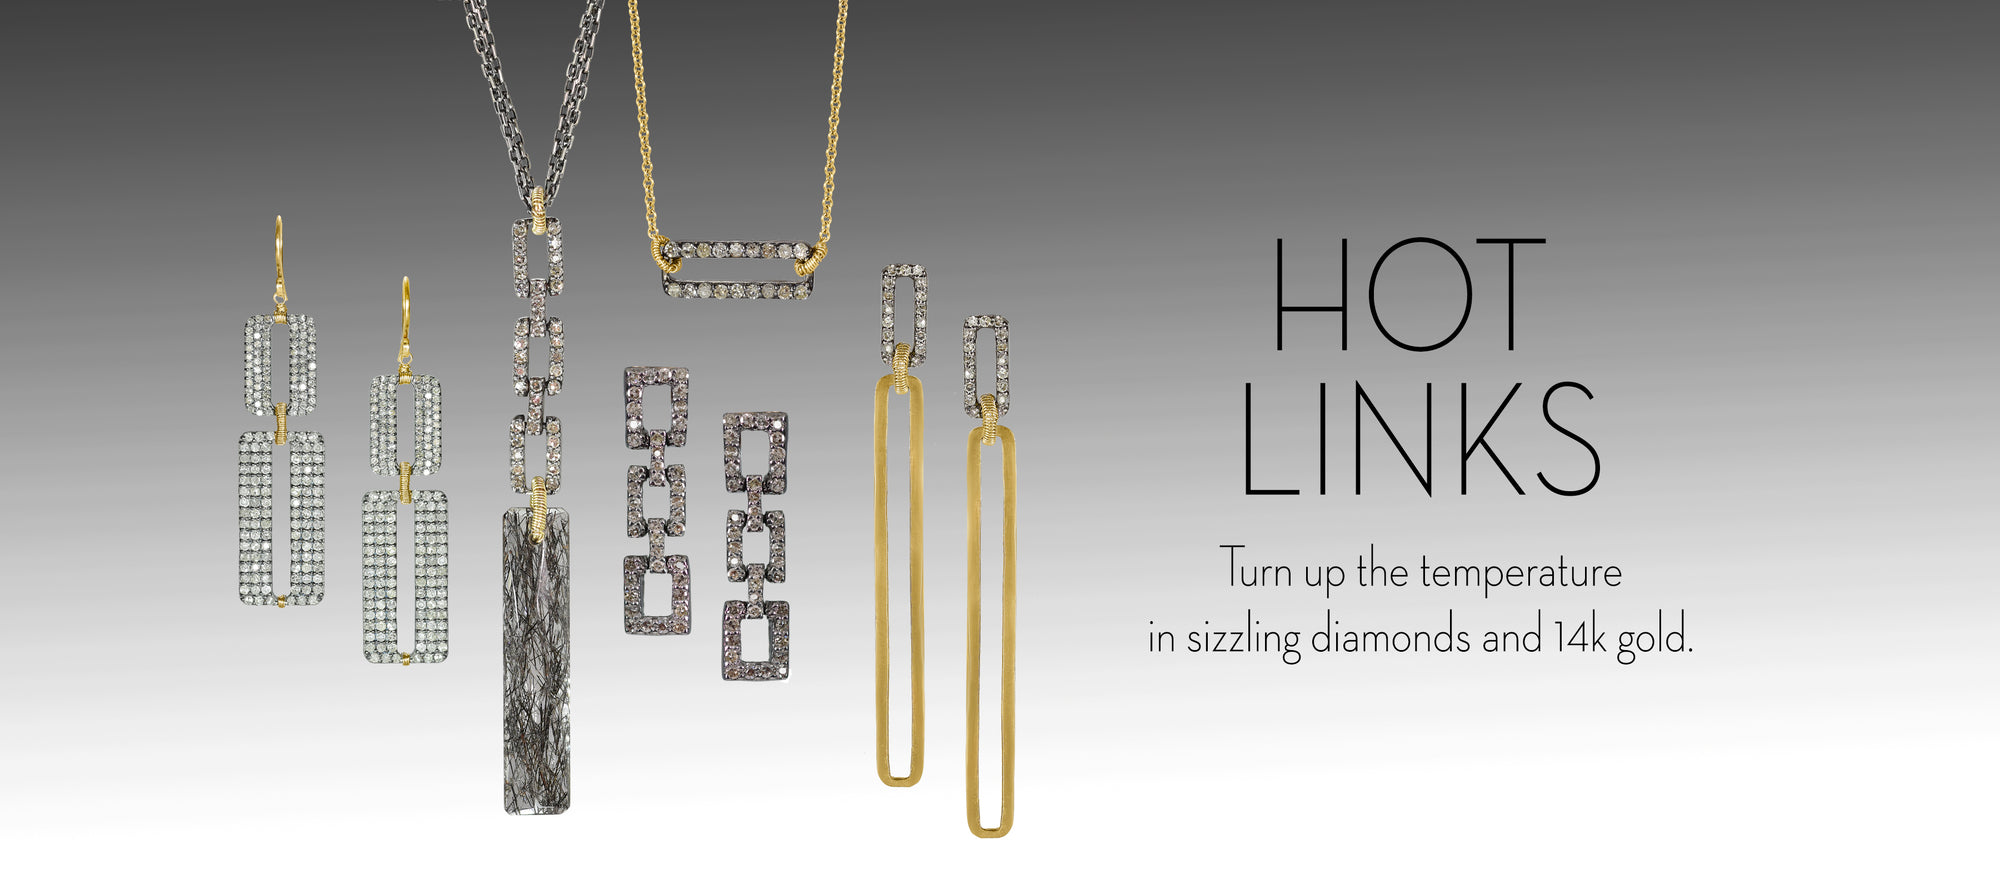 Hot Links. Add some allure with these shimmering, swaying captivating styles.